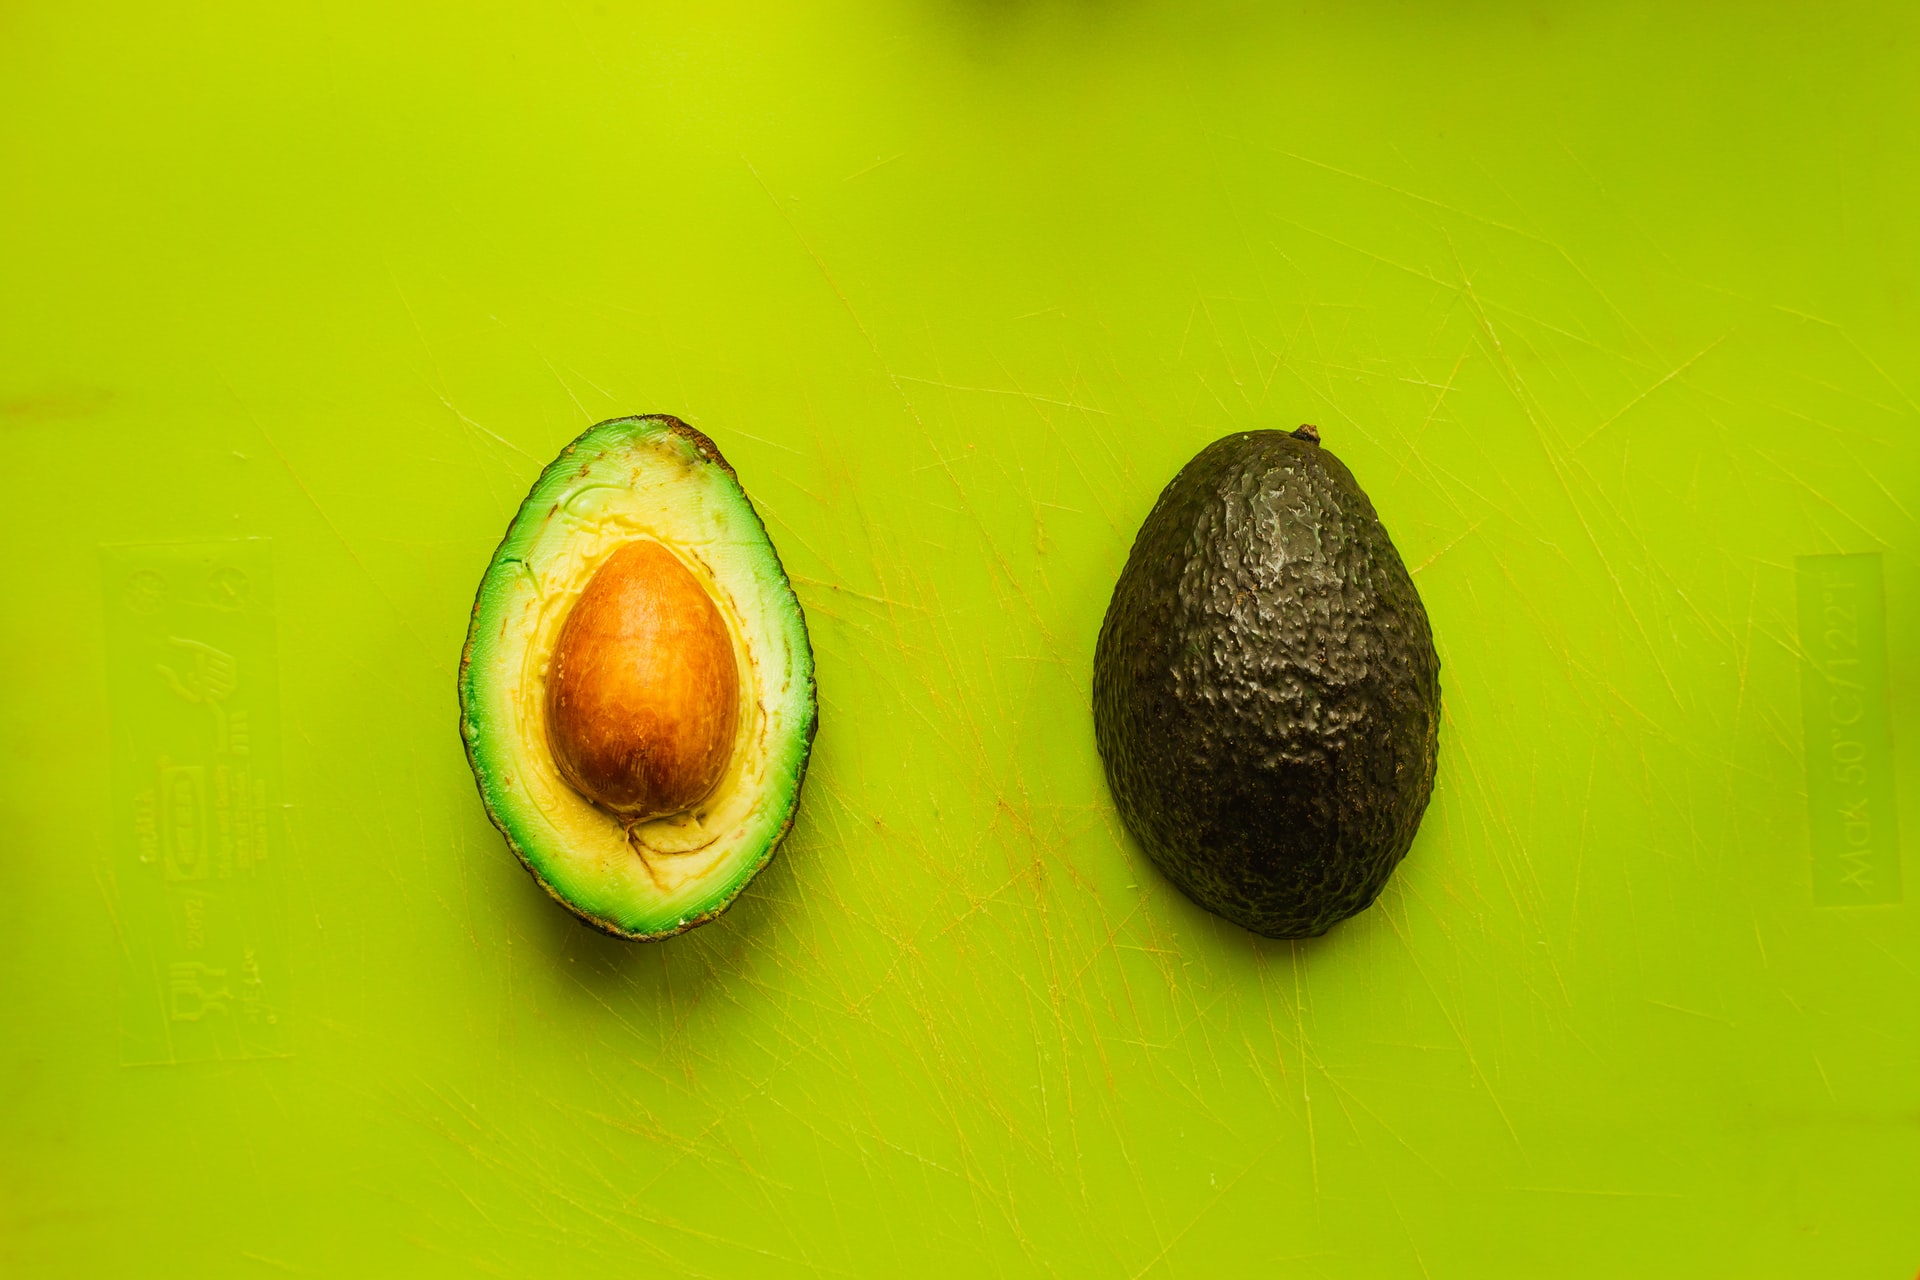 How to Plant Your First Avocado During Quarantine 3